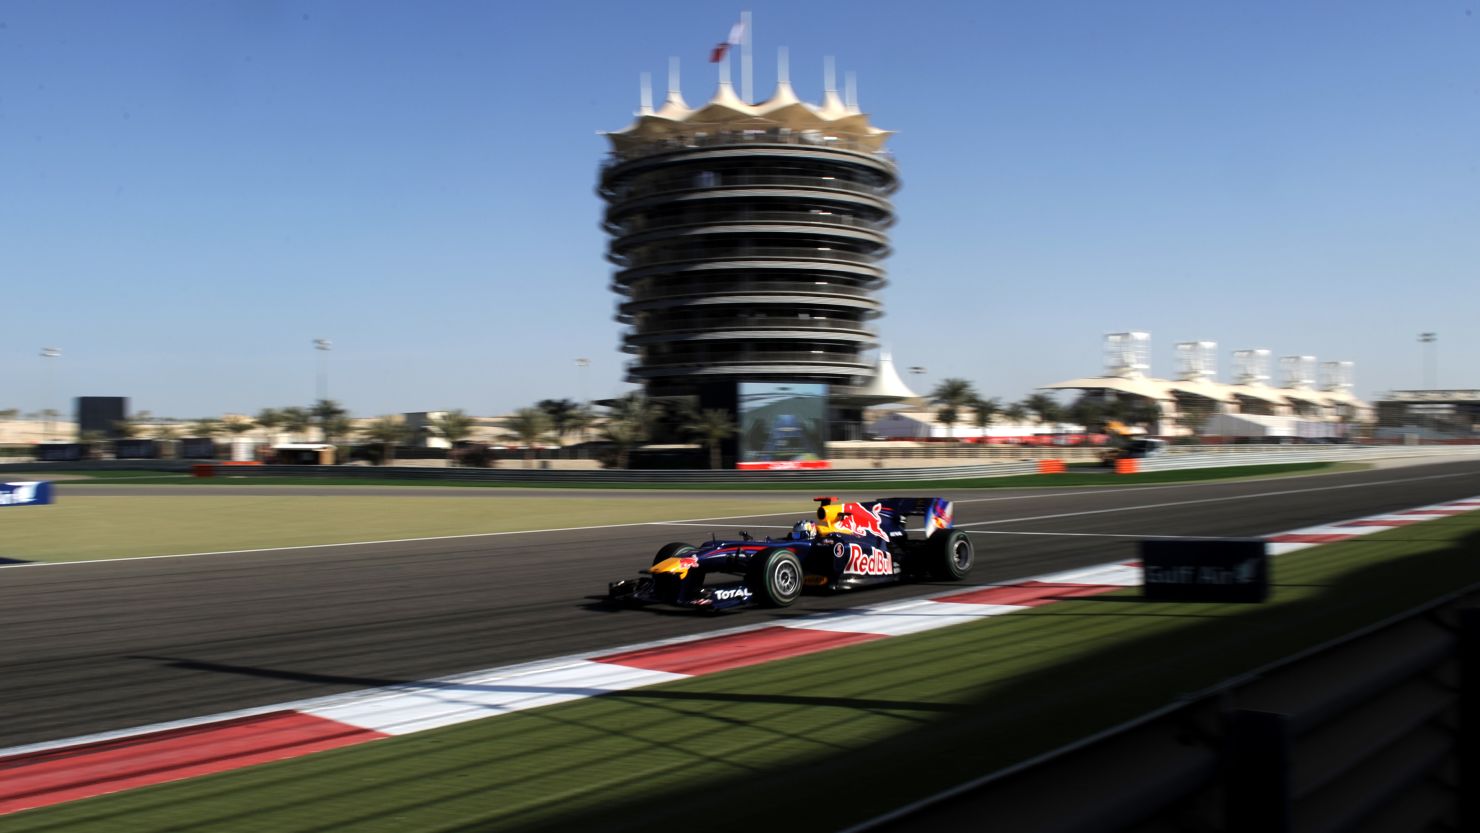 The FIA has ended weeks of speculation by announcing the Bahrain Grand Prix will go ahead on April 22